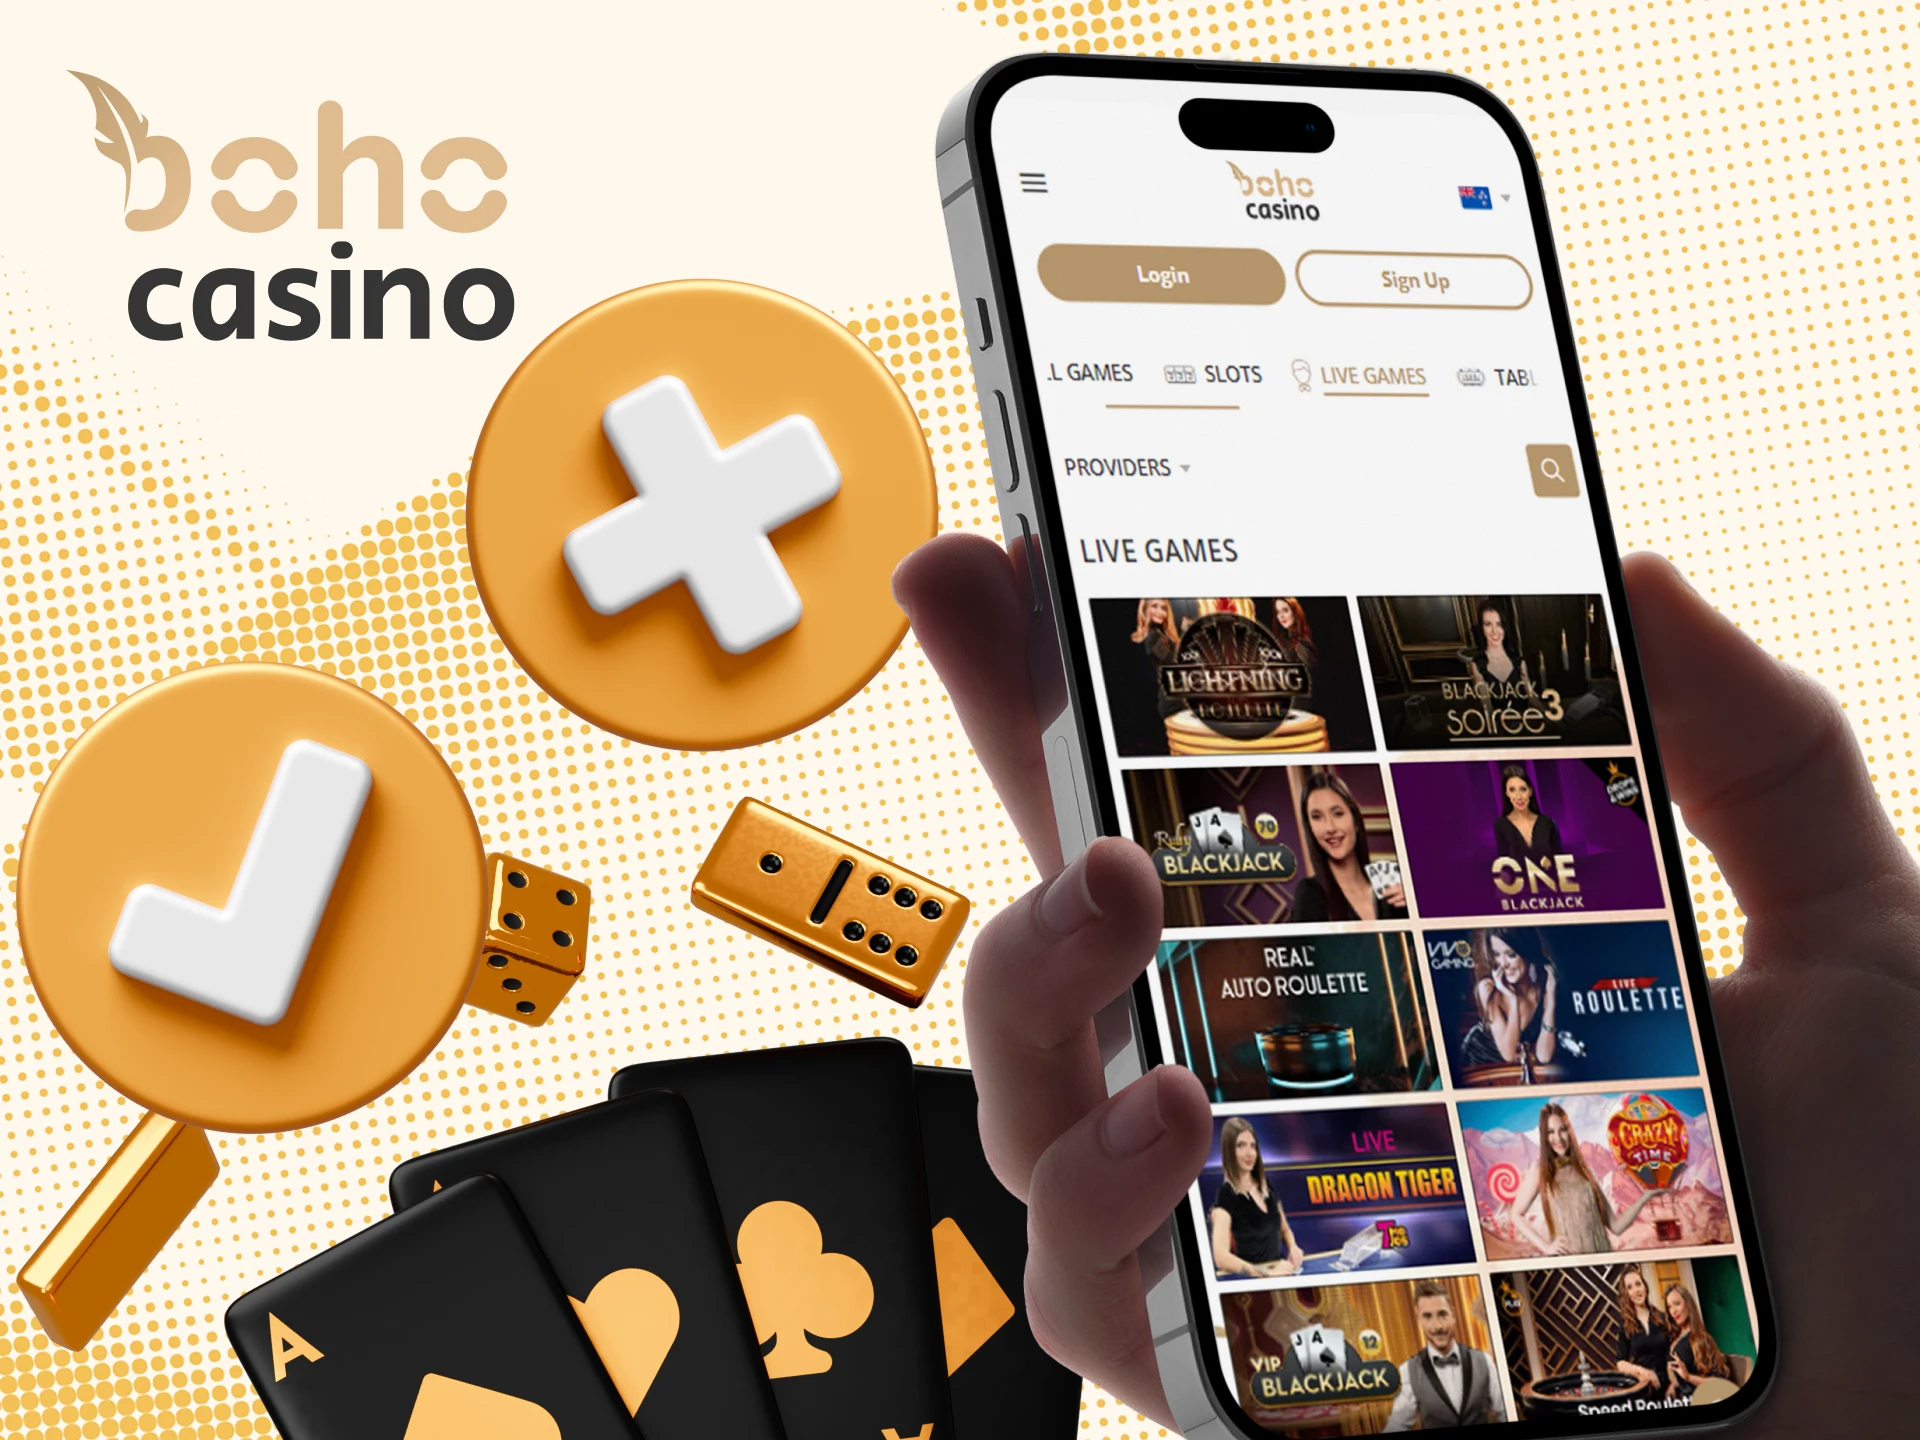 There are some pros and cons of Boho Live Casino.